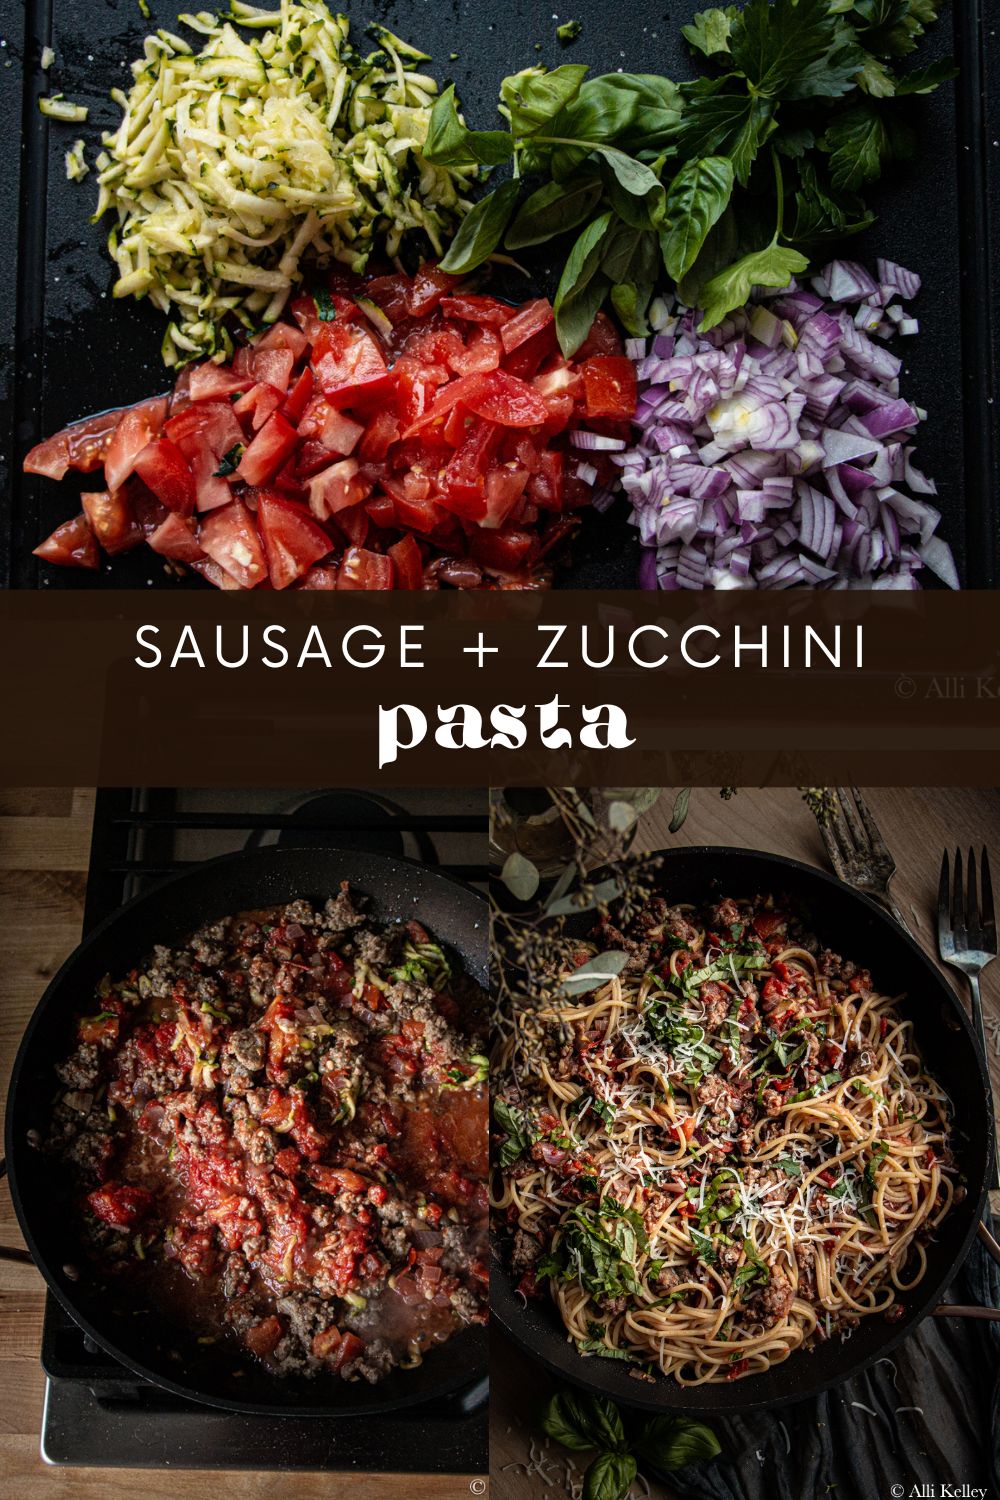 Zucchini and Sausage Spaghetti is a quick dish that is packed full of fresh flavor. Substitute the pasta for spaghetti squash to make it even healthier!